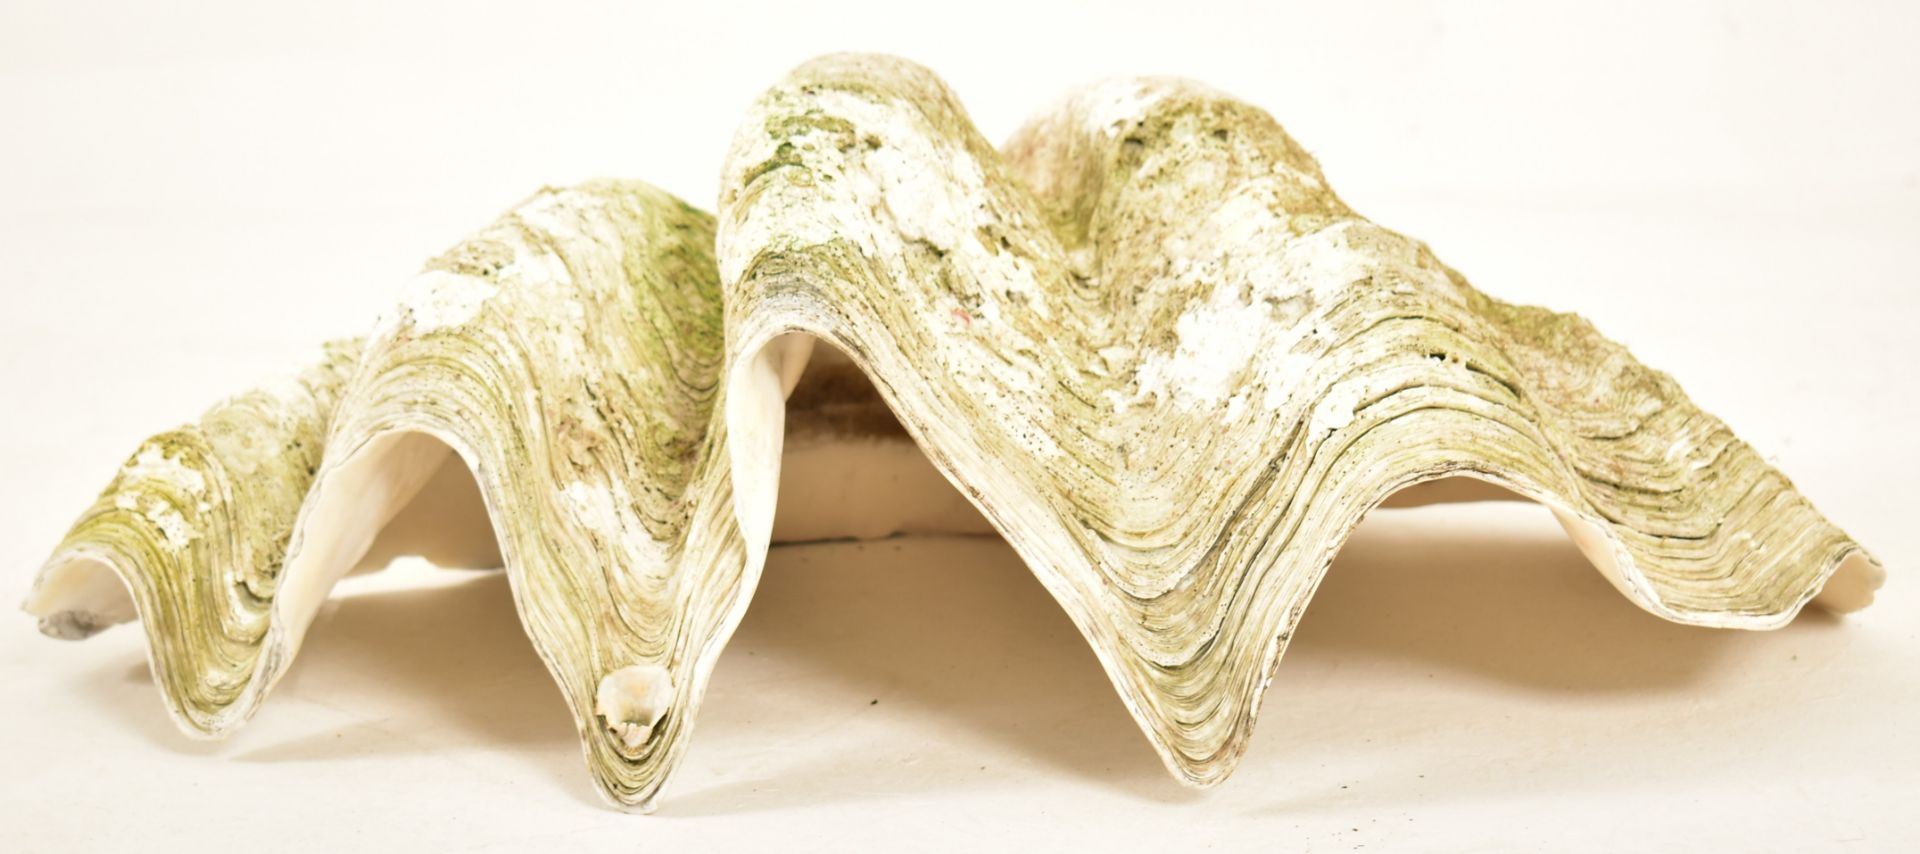 CONCHOLOGY - GIANT CLAM SHELL (TRIDACNA GIGAS) - 77CM WIDE